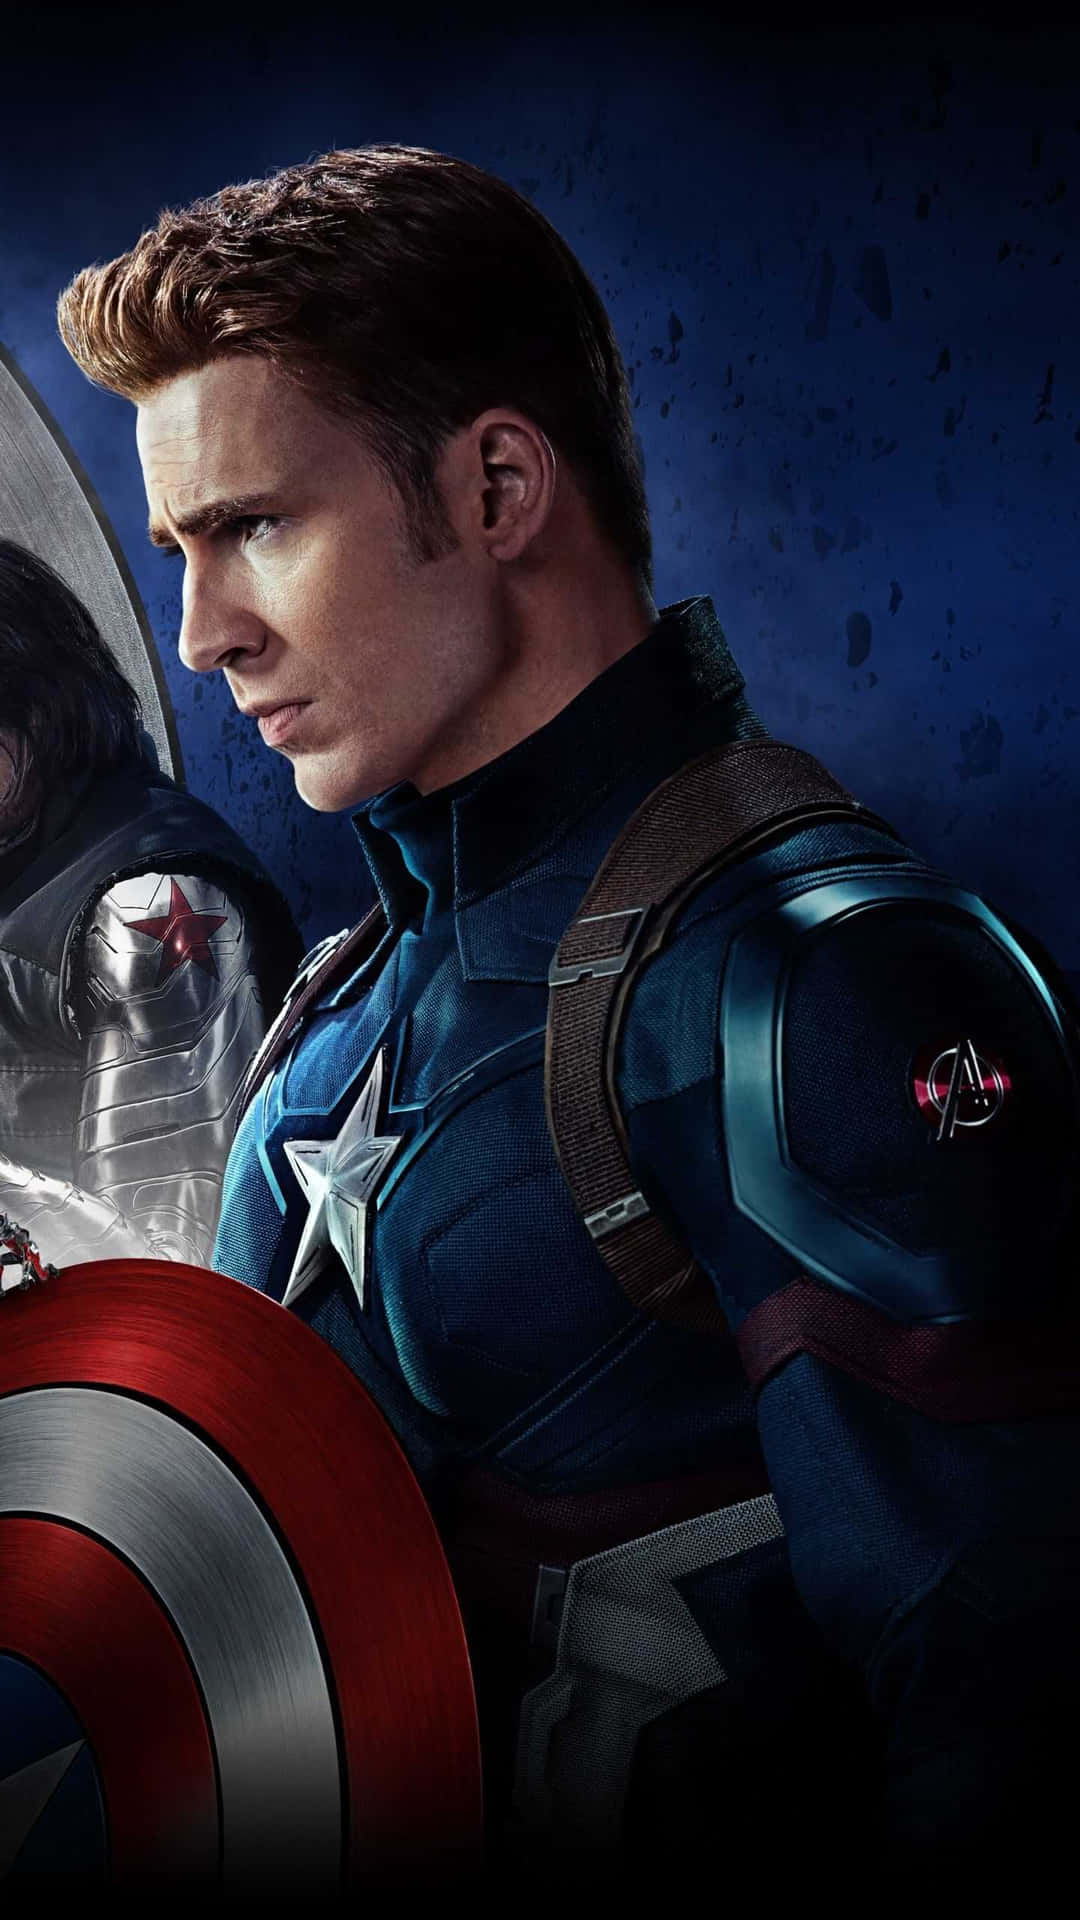 Fight alongside Android Captain America